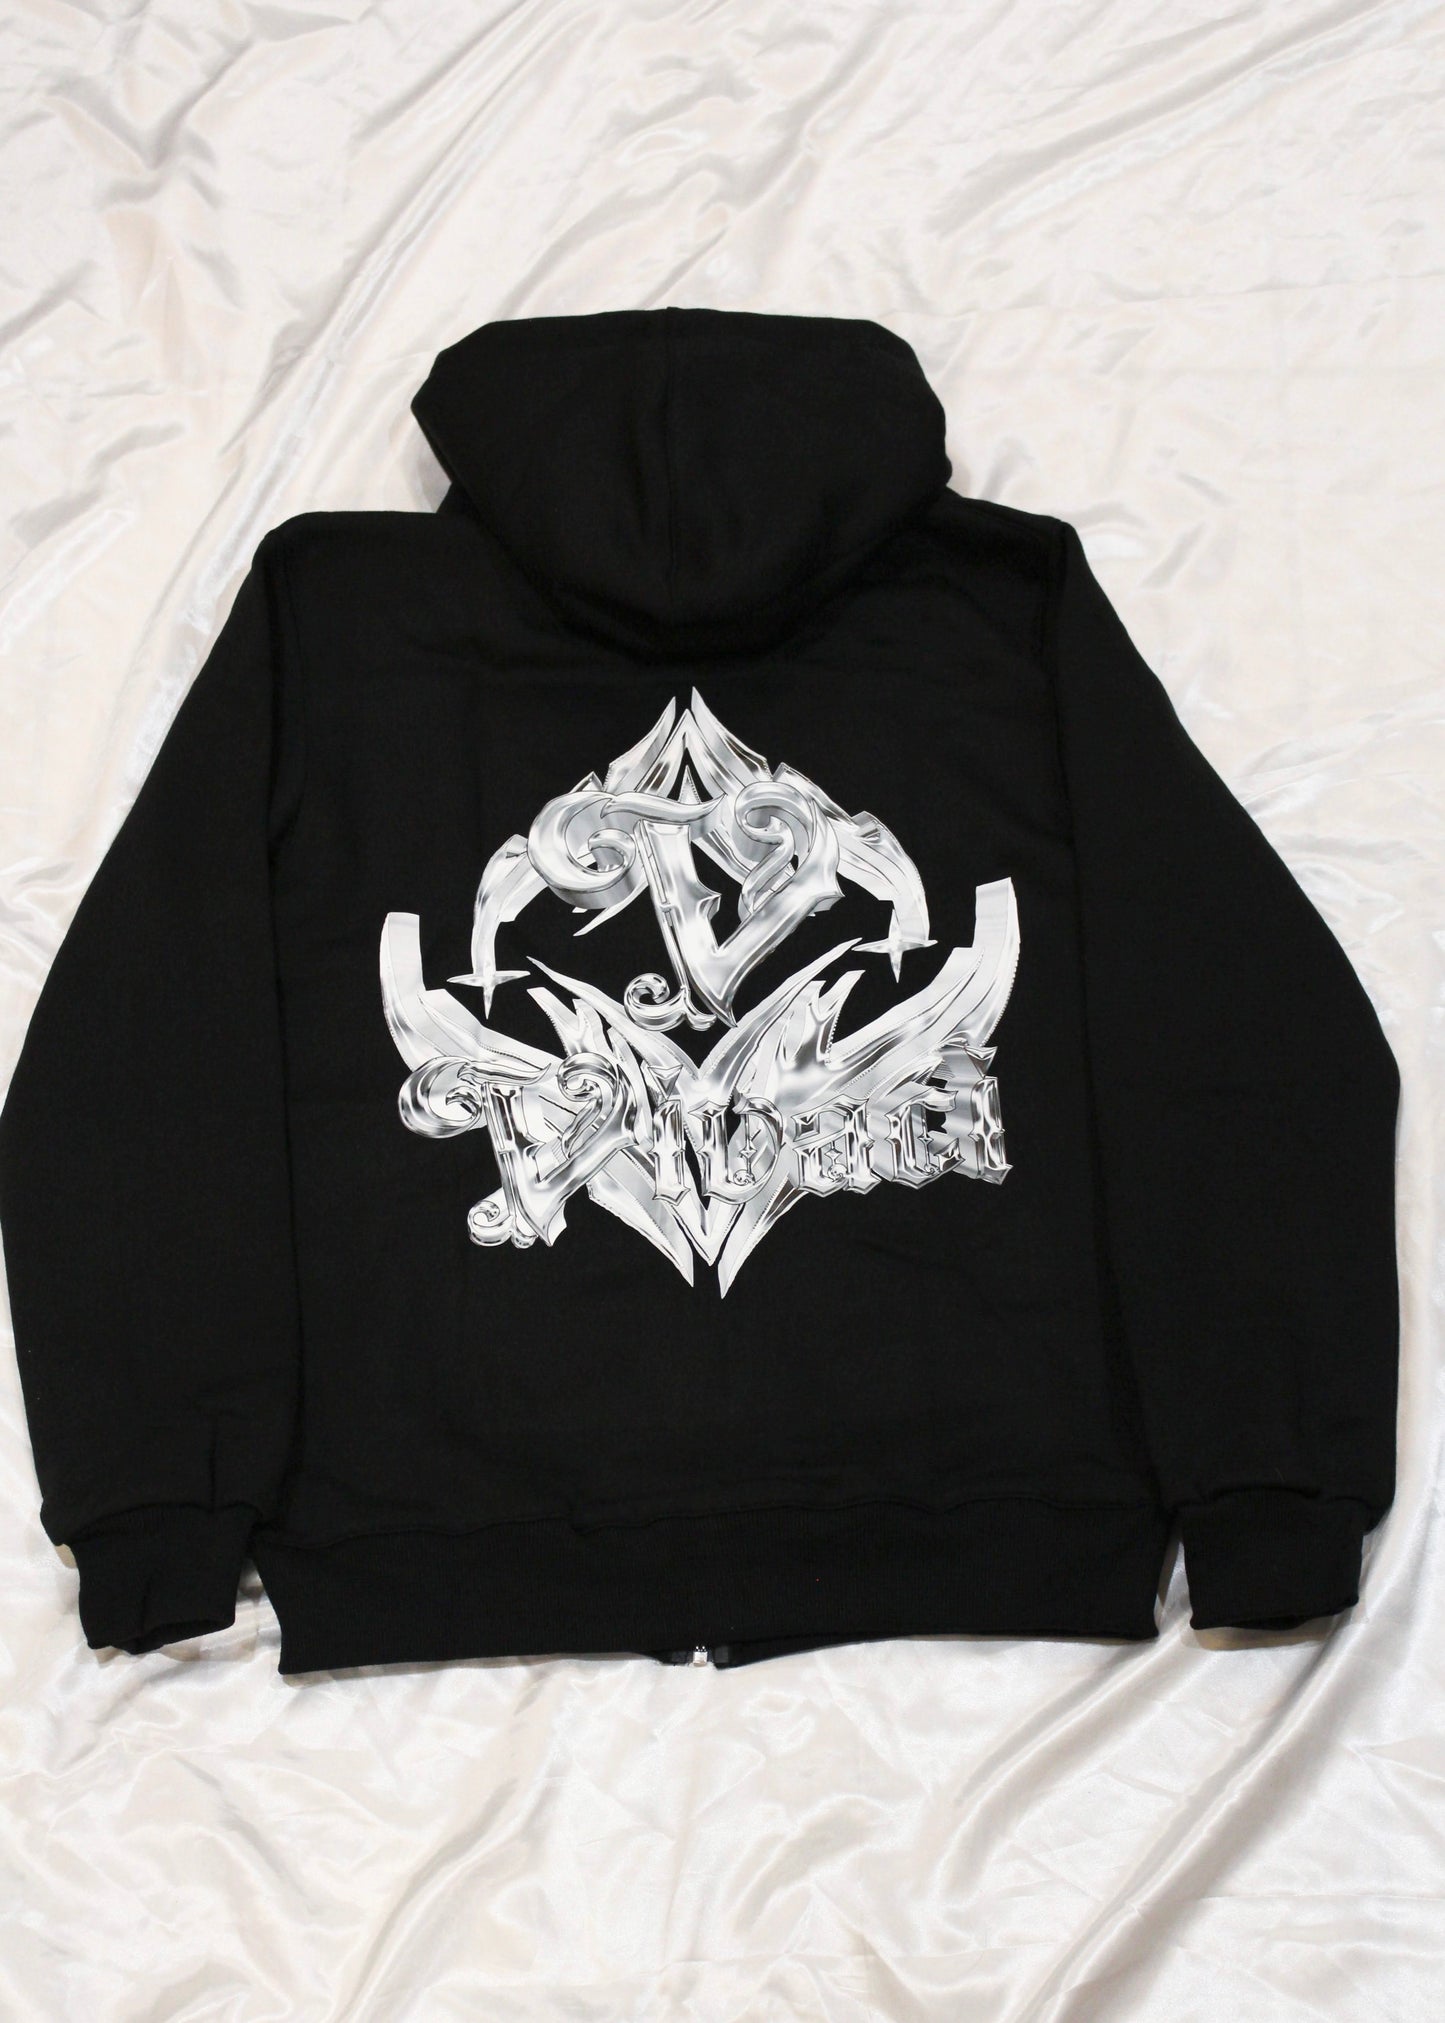 [Limited Edition] Allure Collection V2: Black Hood Rhinestone Zip Up Hoodie